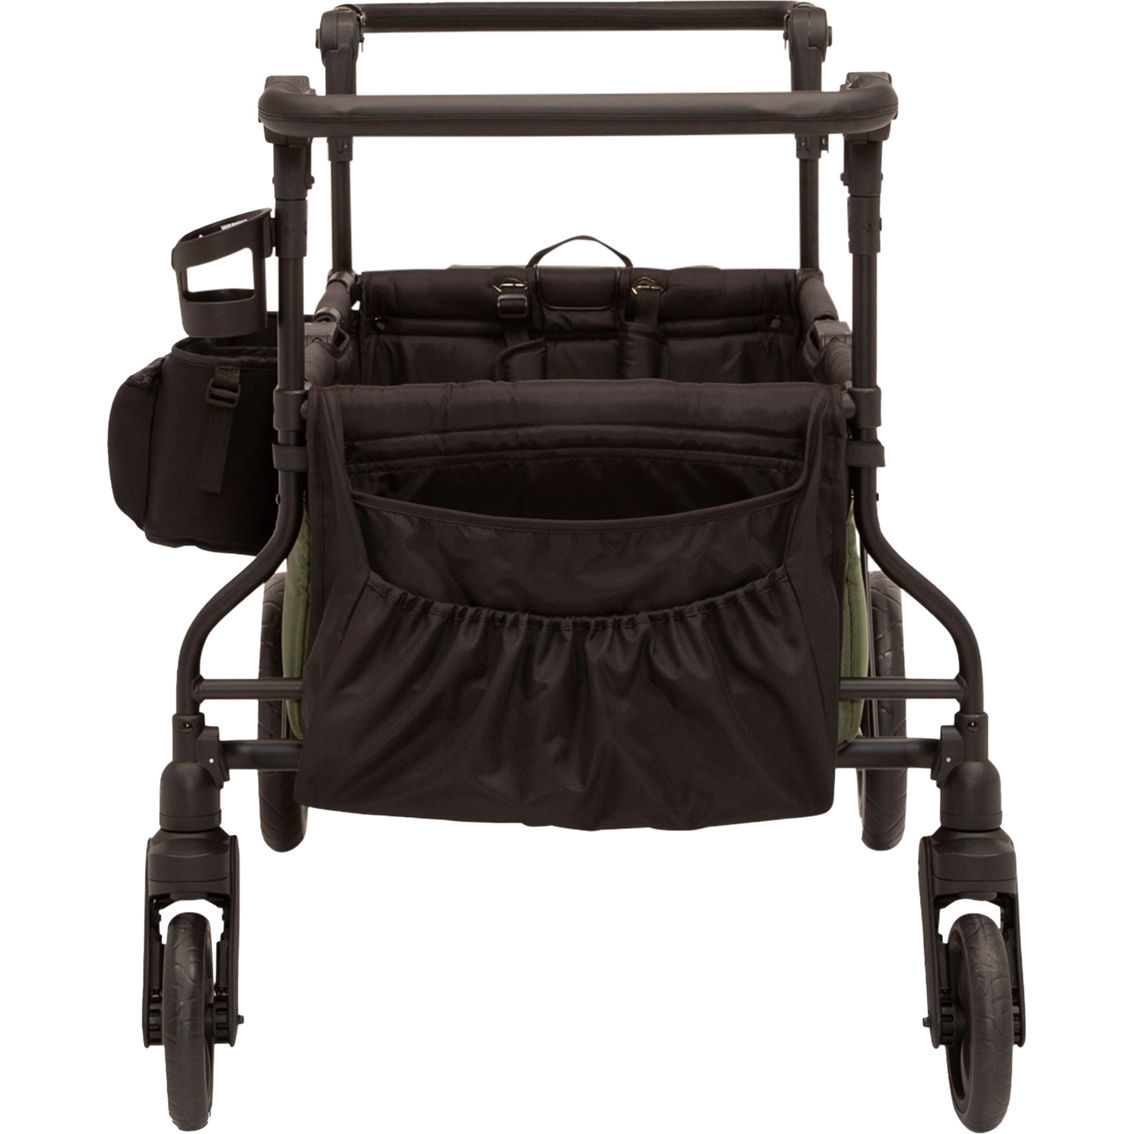 Jeep Deluxe Wrangler Wagon Stroller with Cooler Bag and Parent Organizer - Image 5 of 10